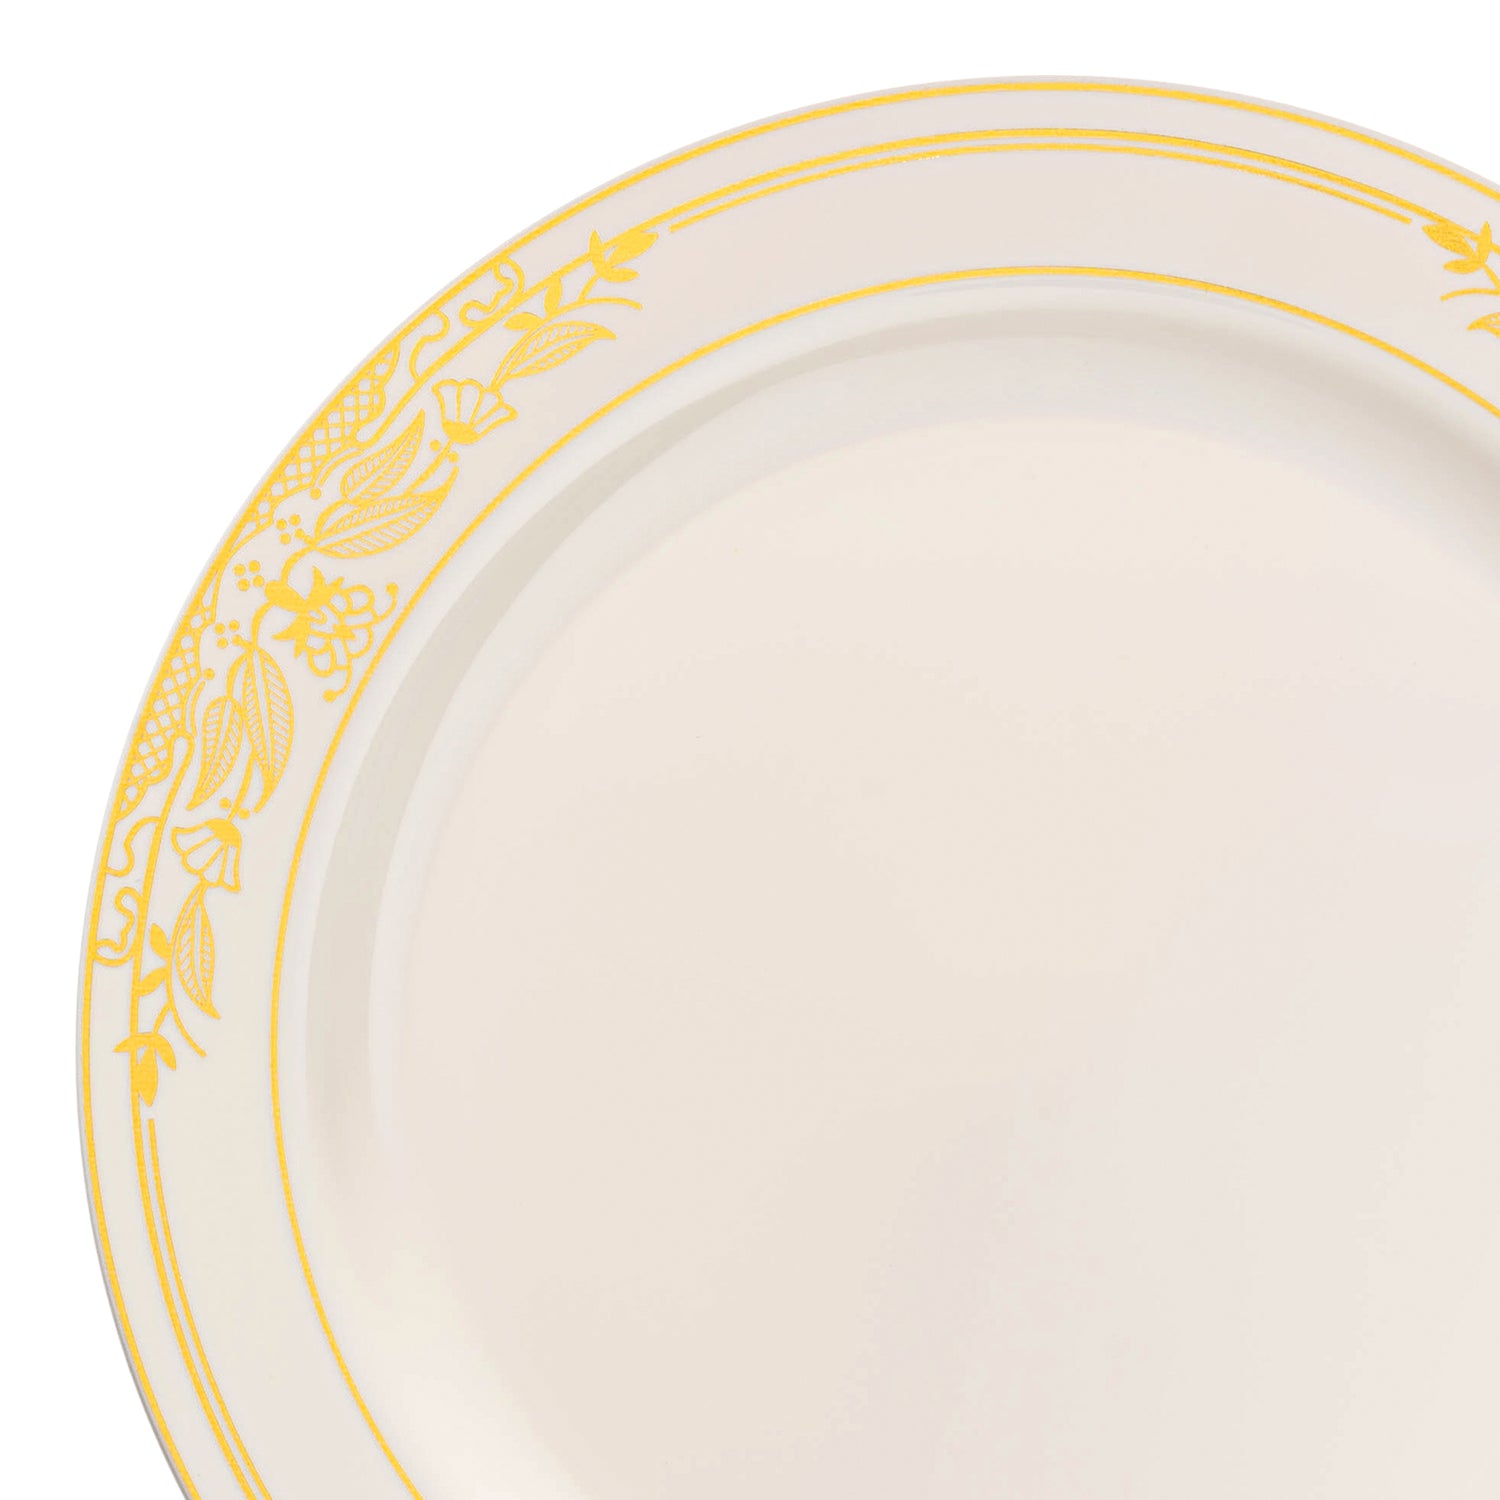 Ivory with Gold Harmony Rim Disposable Plastic Dinner Plates (10.25") | The Kaya Collection